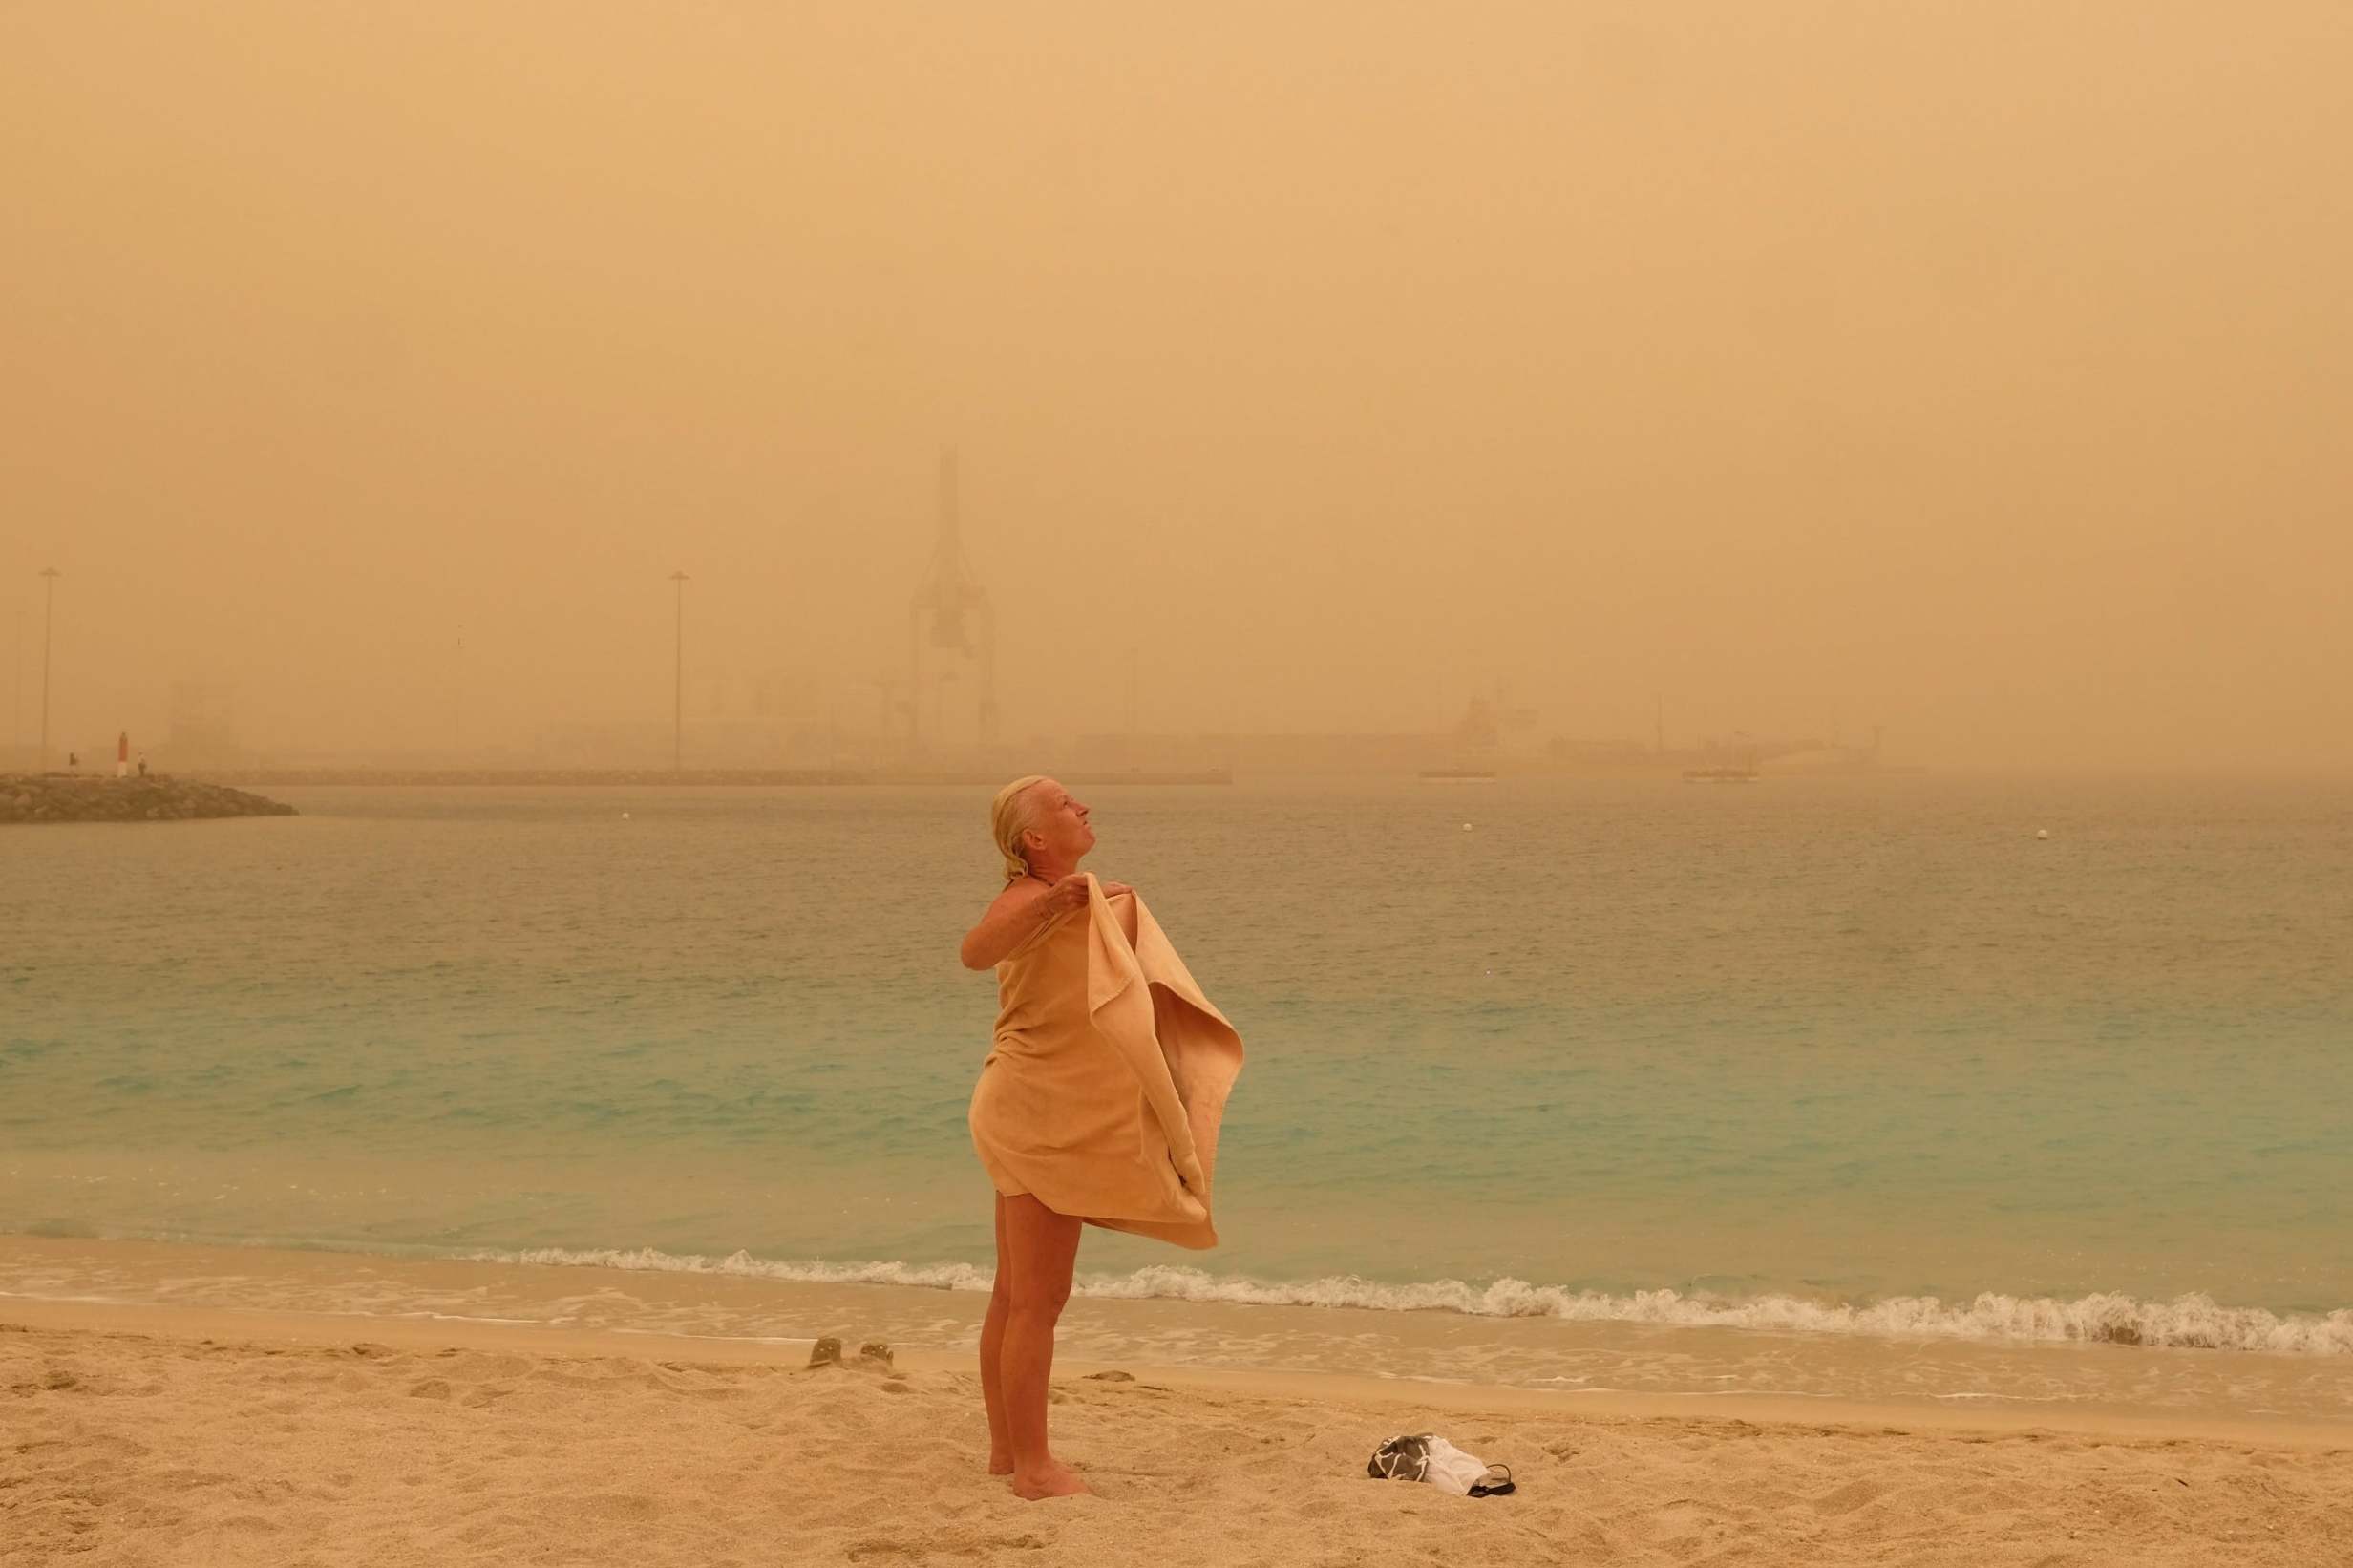 A tourist dries off after a swim in Fuerteventura, which has been hit by large amounts of dust that has blown over from the Sahara